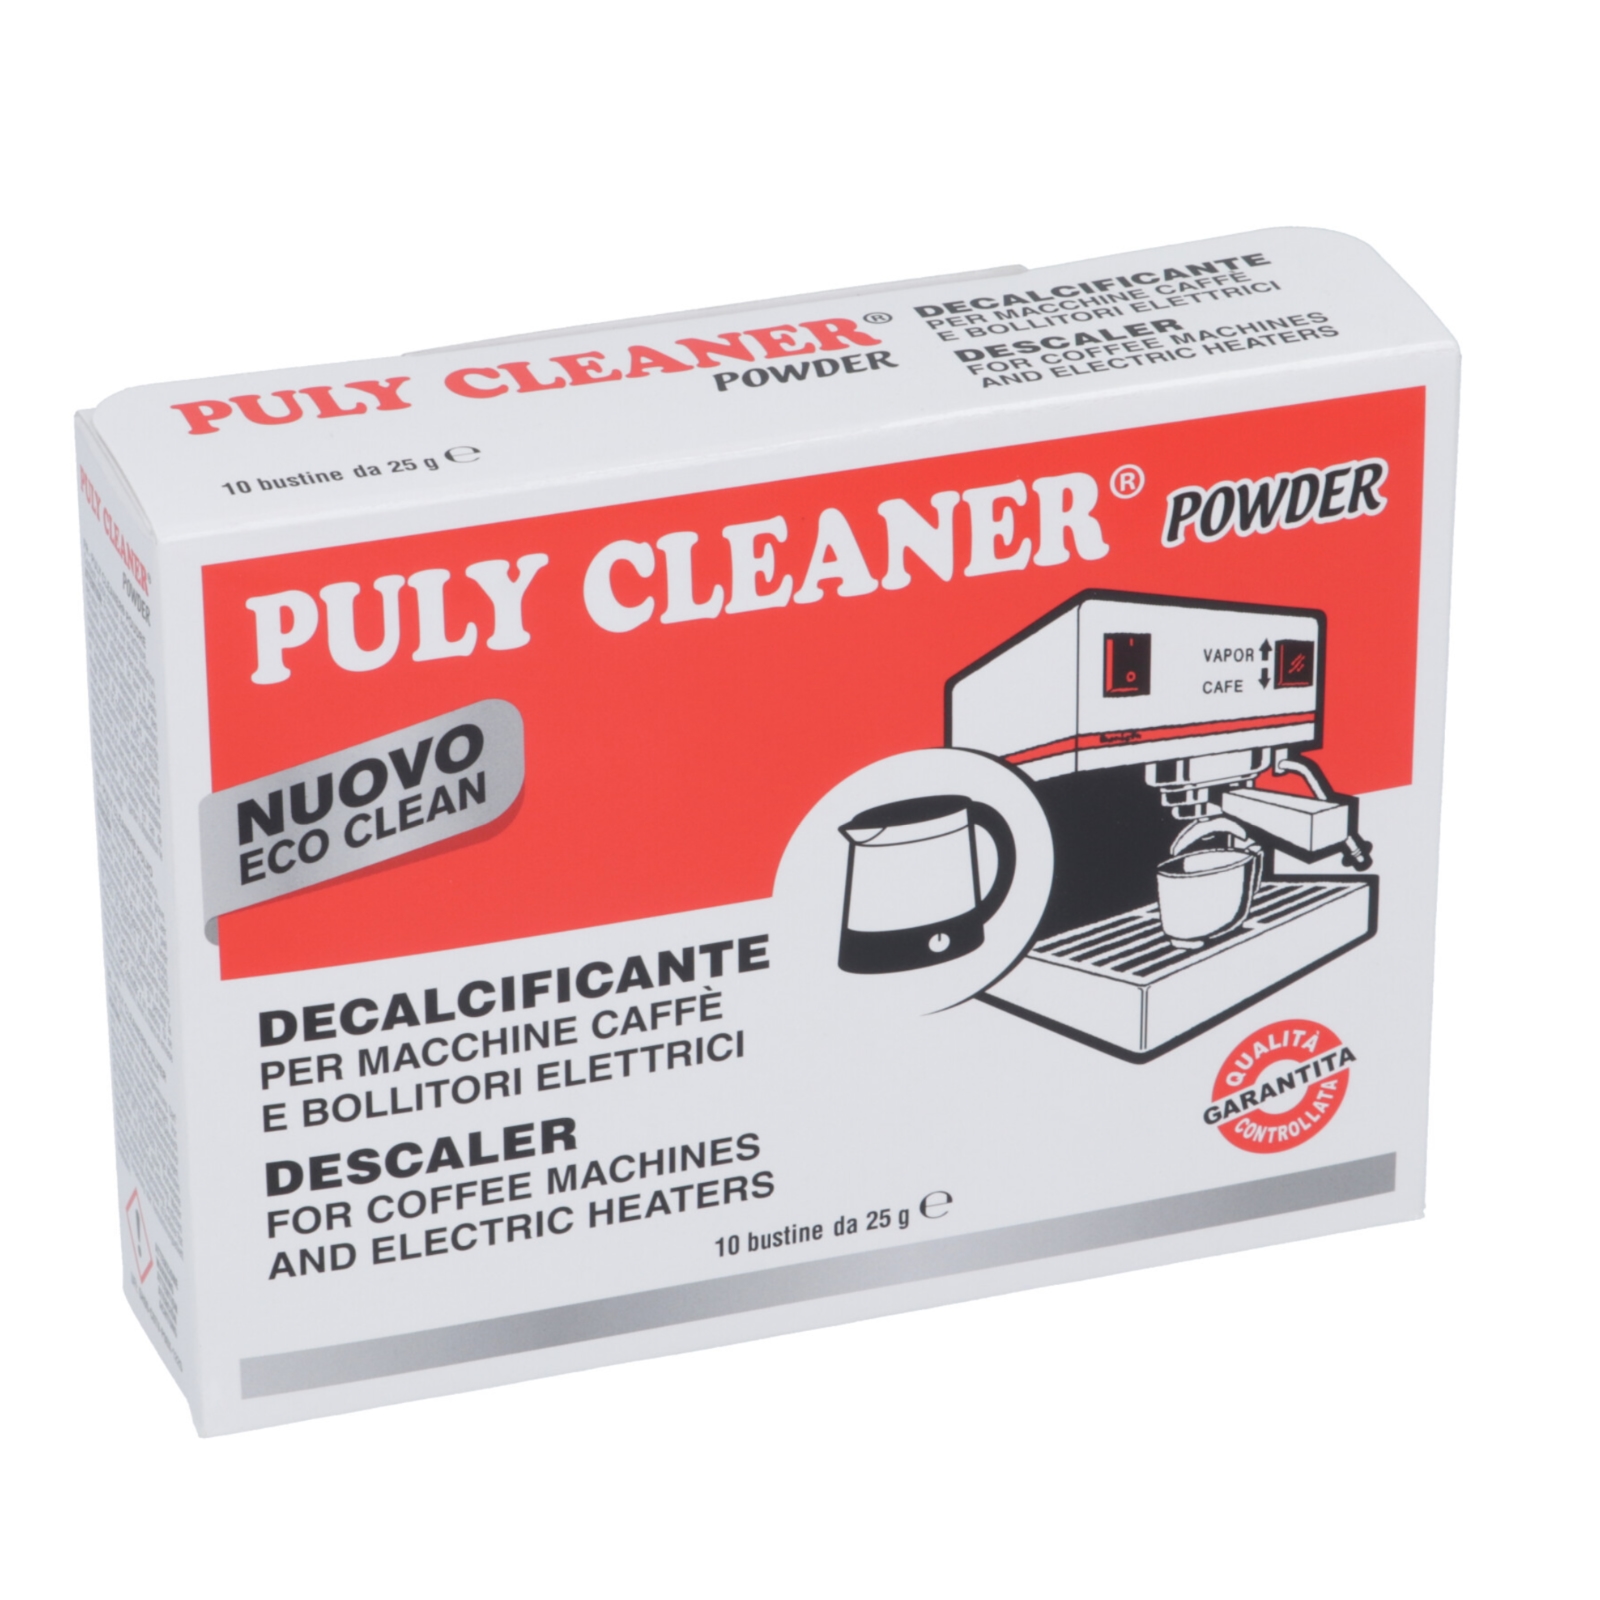 Descaler for coffee machines „Puly Cleaner"® Powder , 10x25 g (Damaged packaging!)